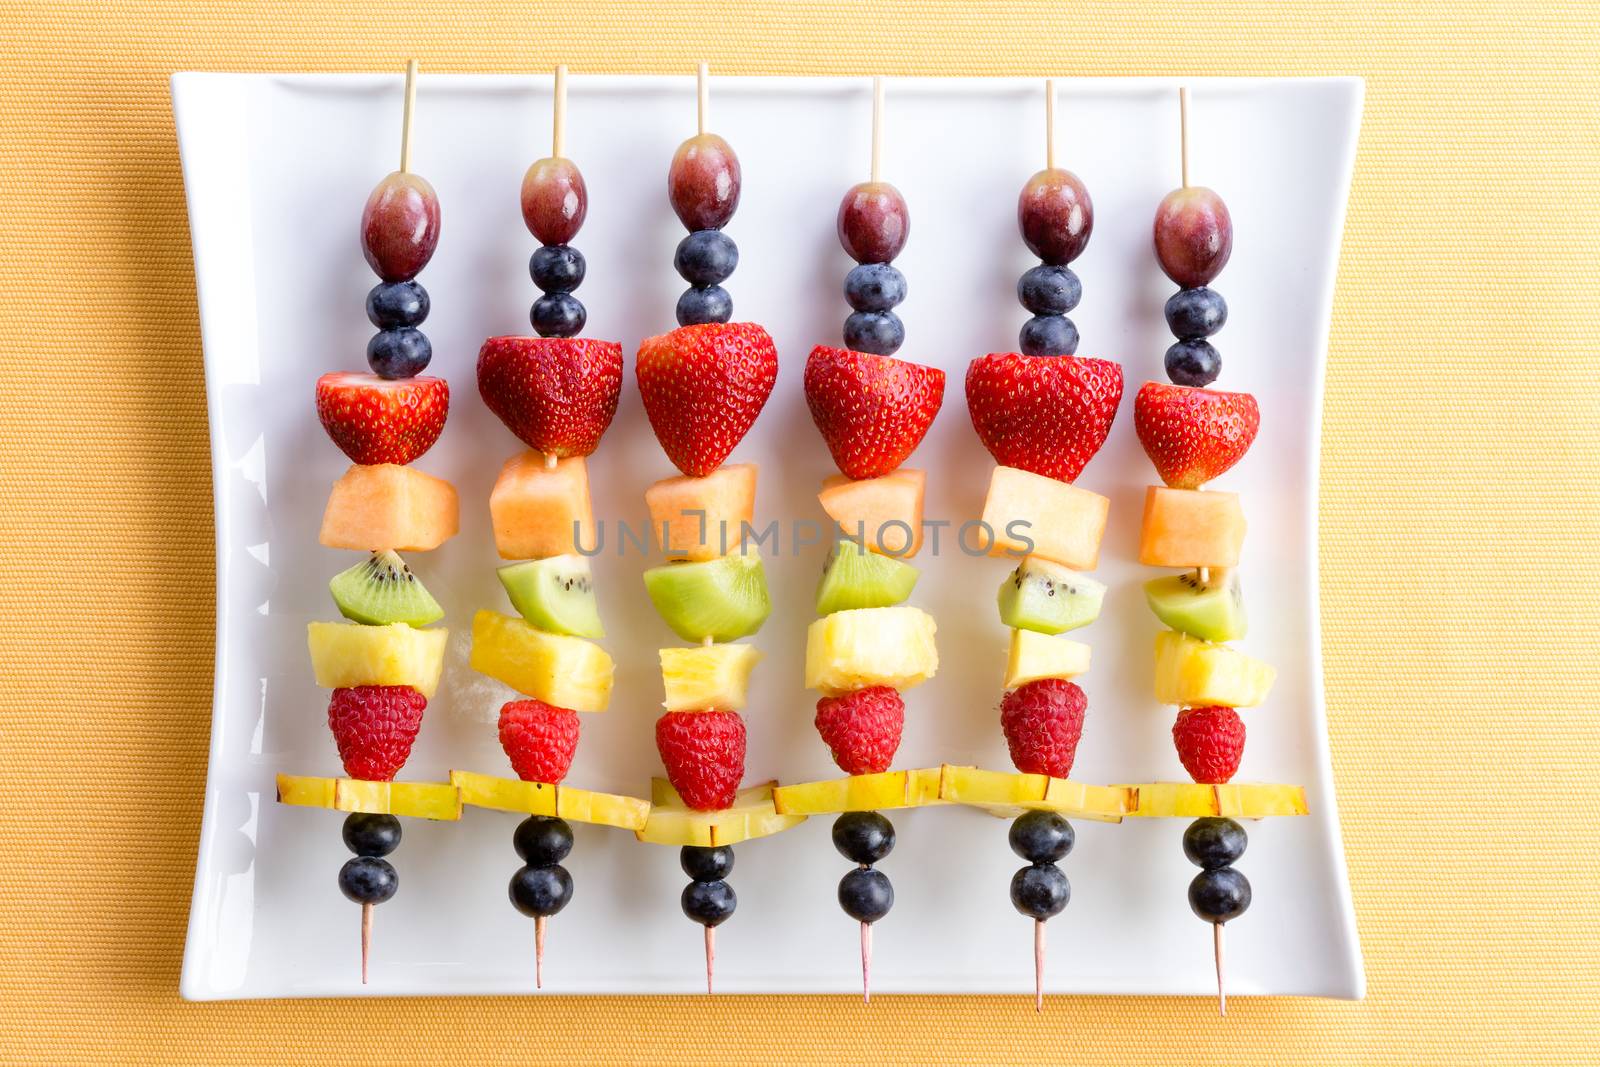 Healthy colorful fresh shish kebab fruit treats made from seasonal summer tropical fruit arranged neatly in a row on a modern white rectangular platter on a yellow textured table viewed from above